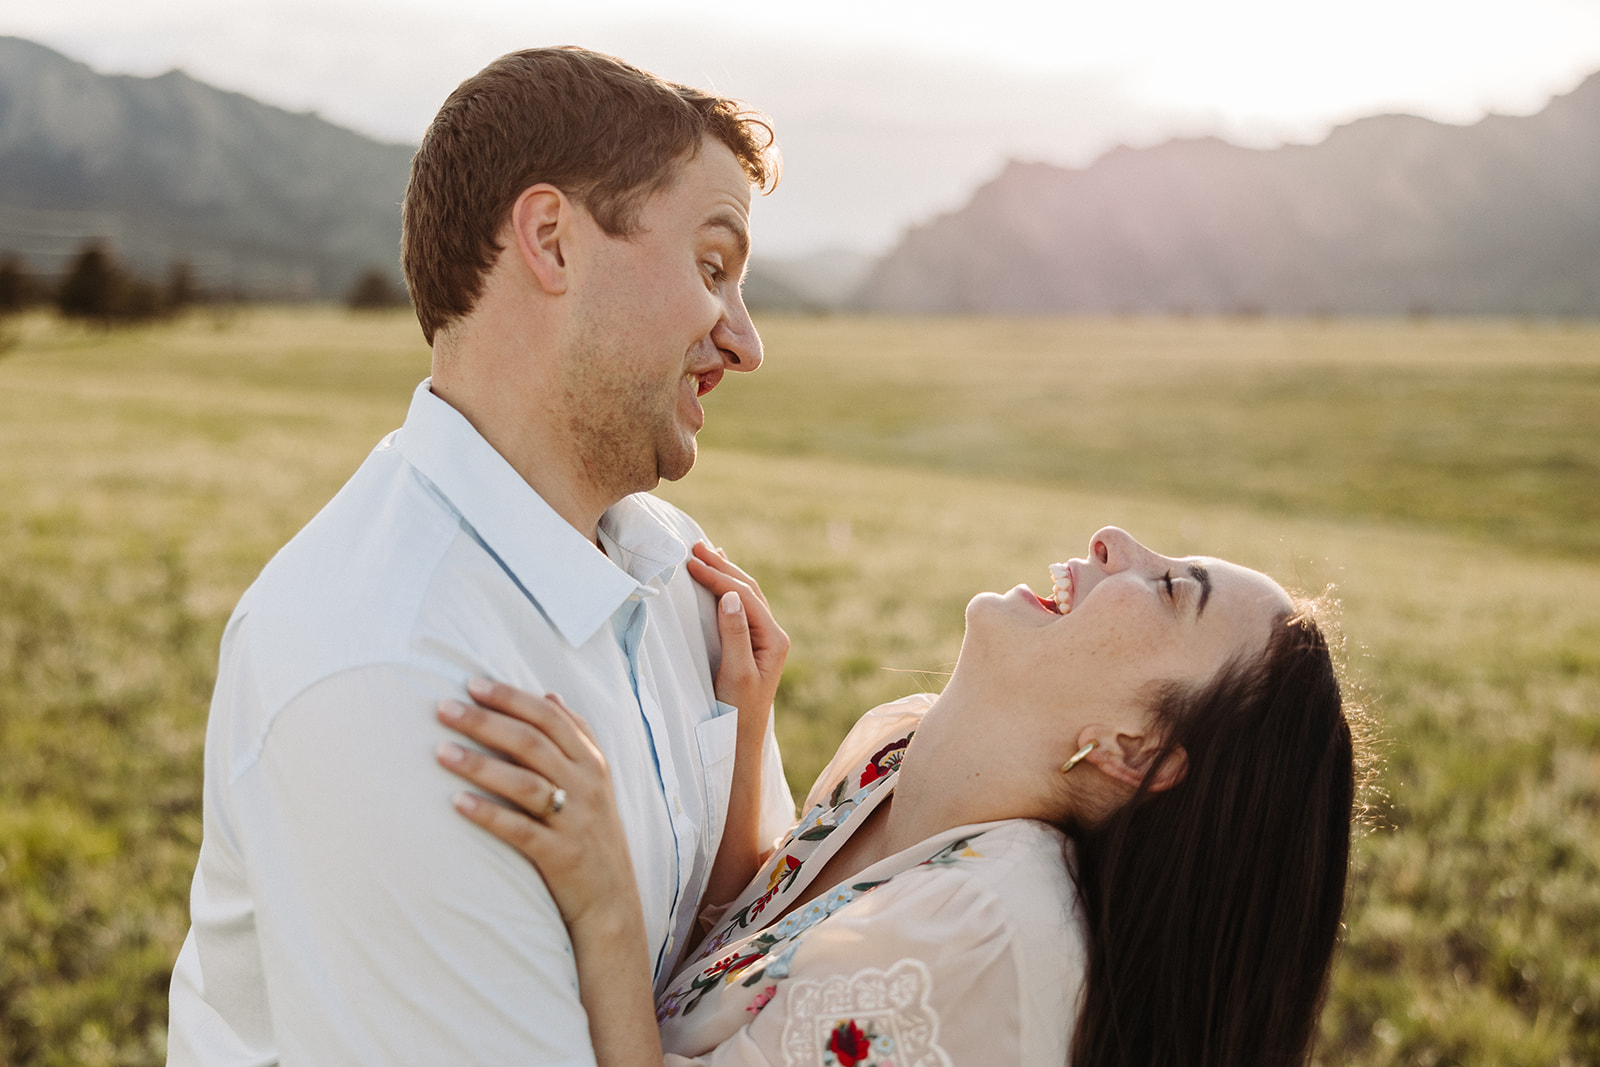 Man holding his fiance as she leans back laughing at his silly expression